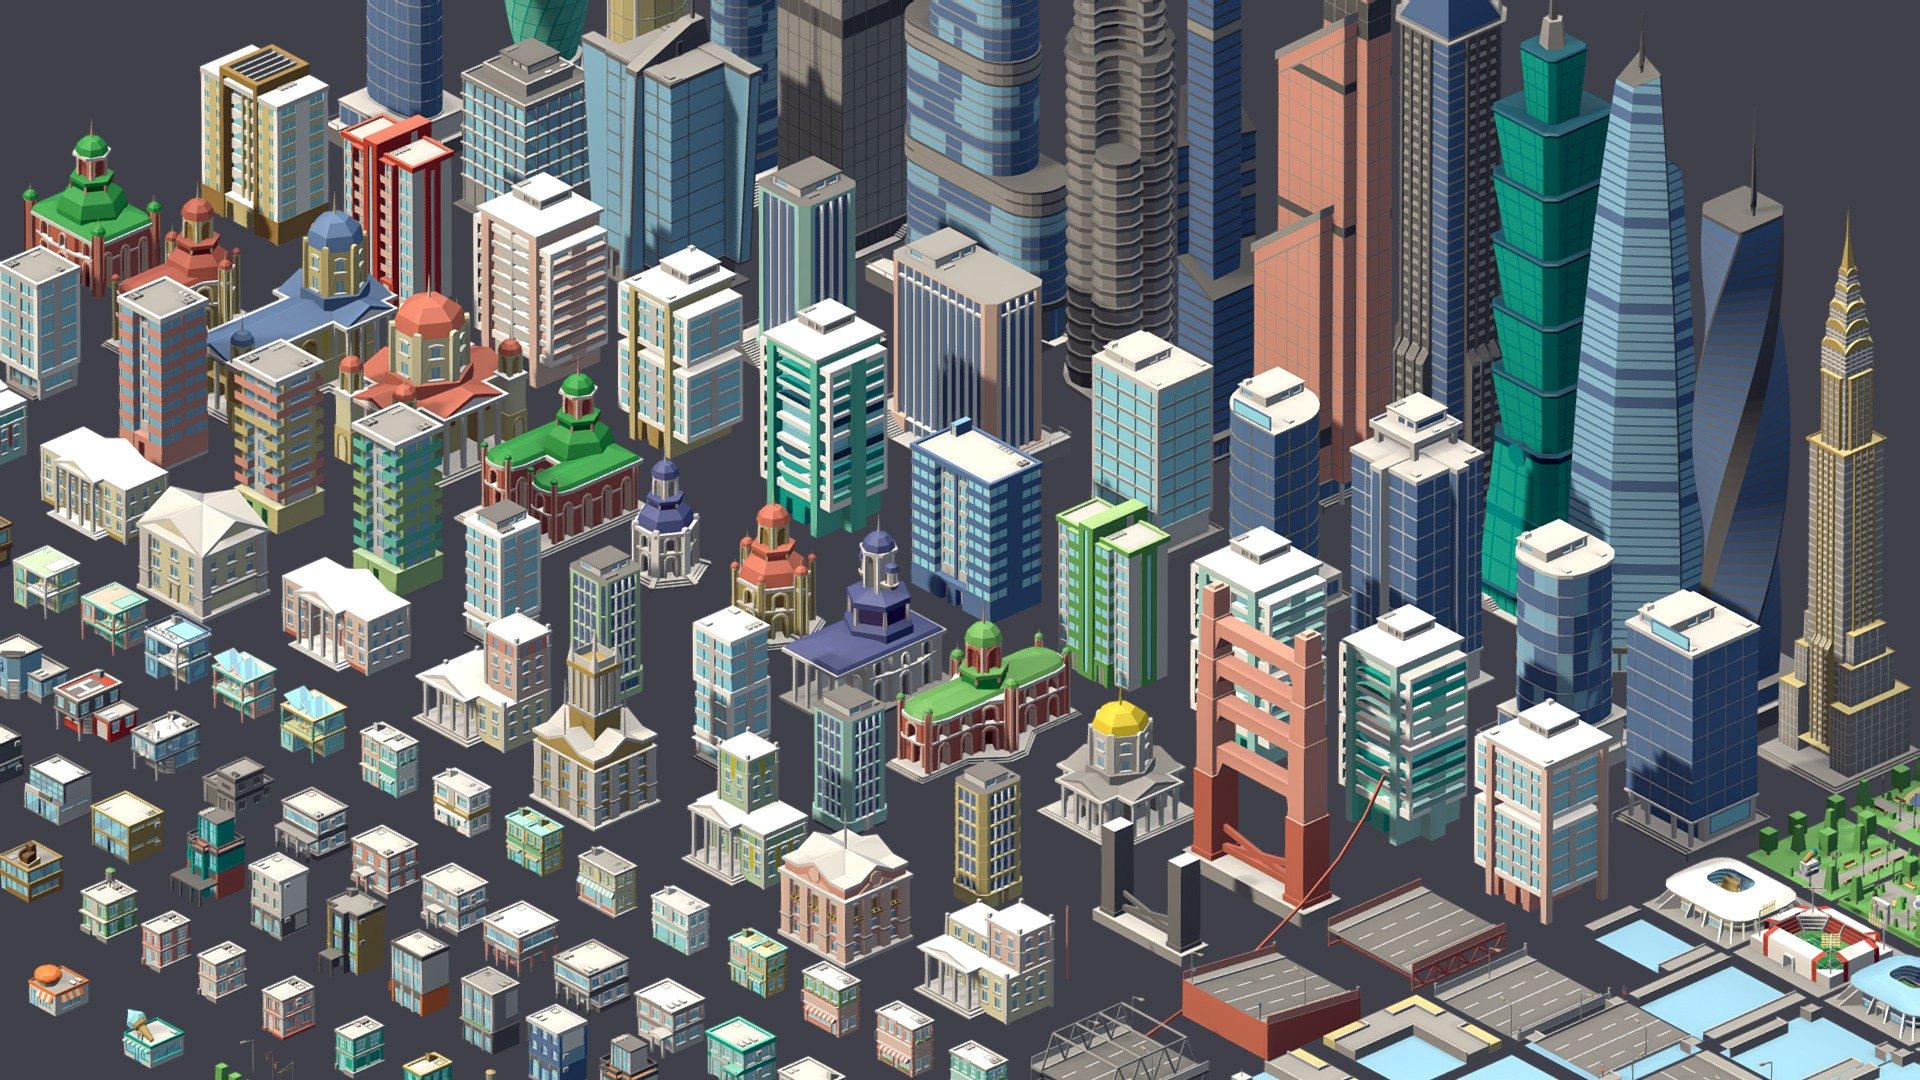 Package:




Set of unique assets (414).

Where to use:





Games. Models optimized for game engines;




Multiplication;




Advertising and marketing;




NFT, metaverses;




VR / AR;




3d printing.



Features:





By combining assets, you can create your own unique city;




You can easily change the color of objects - using the UV map;




Pivot in the logical place of the object;




Model has a logical name.



Geometry:





414 unique assets;




286k triangles all pack.



Items:





Landscape (x97) 




Buildings (x150)




Stadiums (x10)




Park (x10)




Entertainment areas (x10) 




Car (x52) 




Bus (x10)




Truck (x10)




Trailer (x5)




Ships (x10)




Air (x10)




Props (x39)



Scale: 

Real-world-size

Material:

All models use one materials (color) 

Textures:

All models use one texture (as a color palette);

Resolution: 1024 px.

If you liked this package, please leave a review! Creativity to you! - City 1 Assets - Buy Royalty Free 3D model by ithappy 3d model